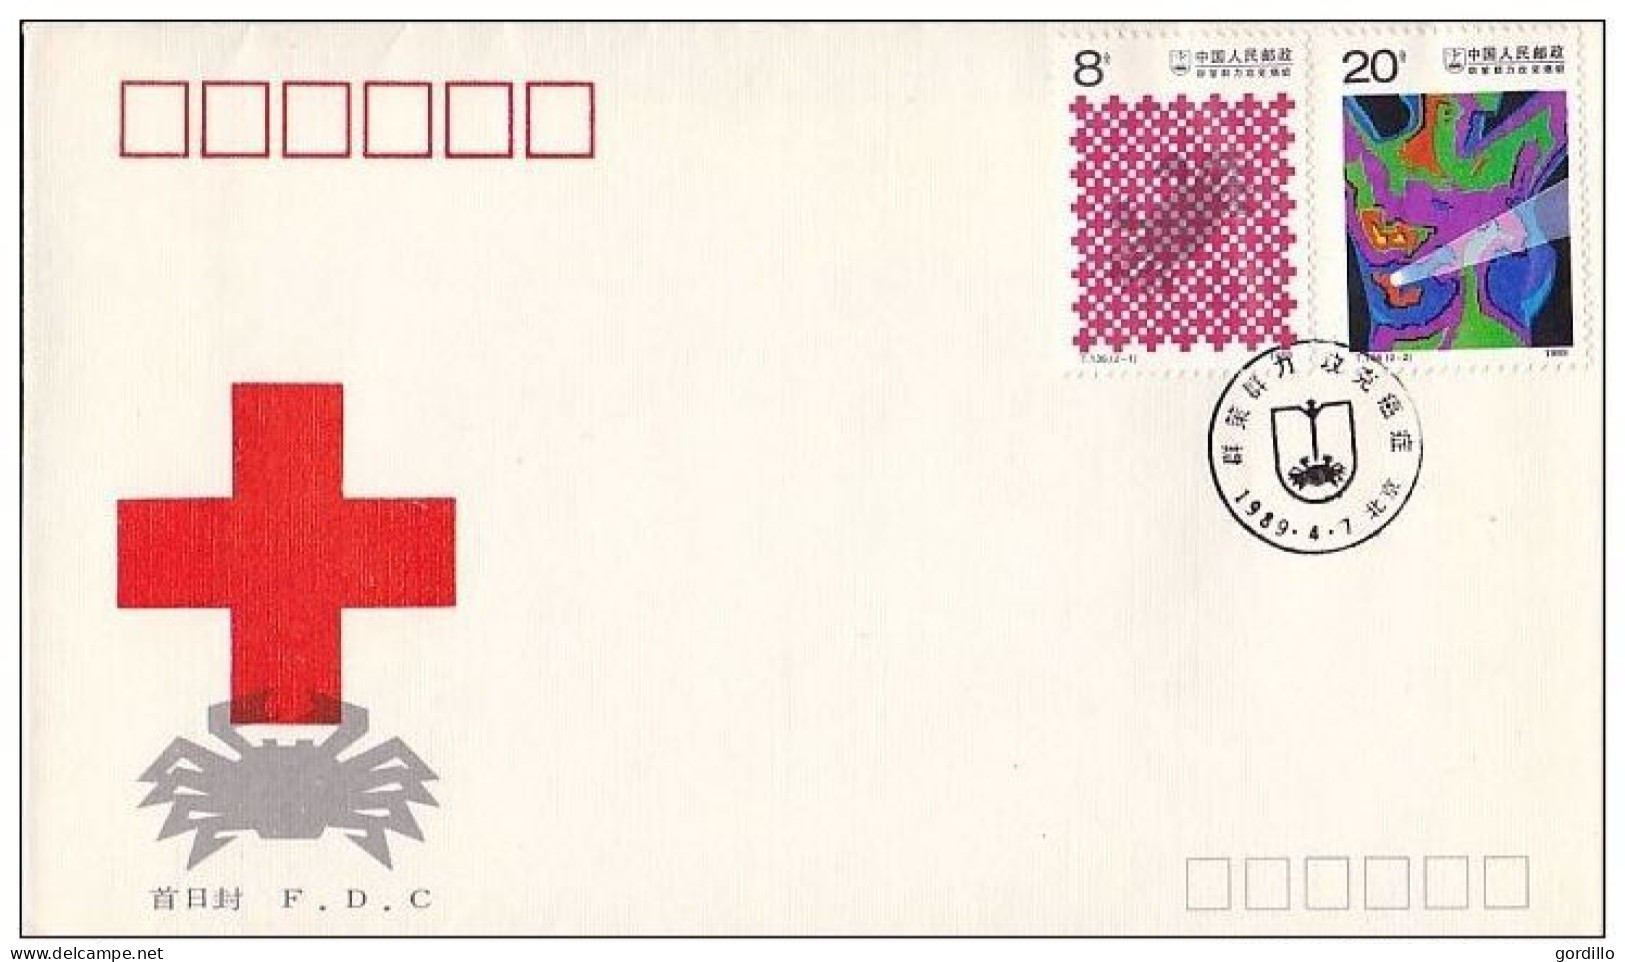 FDC CHINE CHINA FDC   Prévention Du Cancer - Cancer Prevention And Resistance - ...-1979